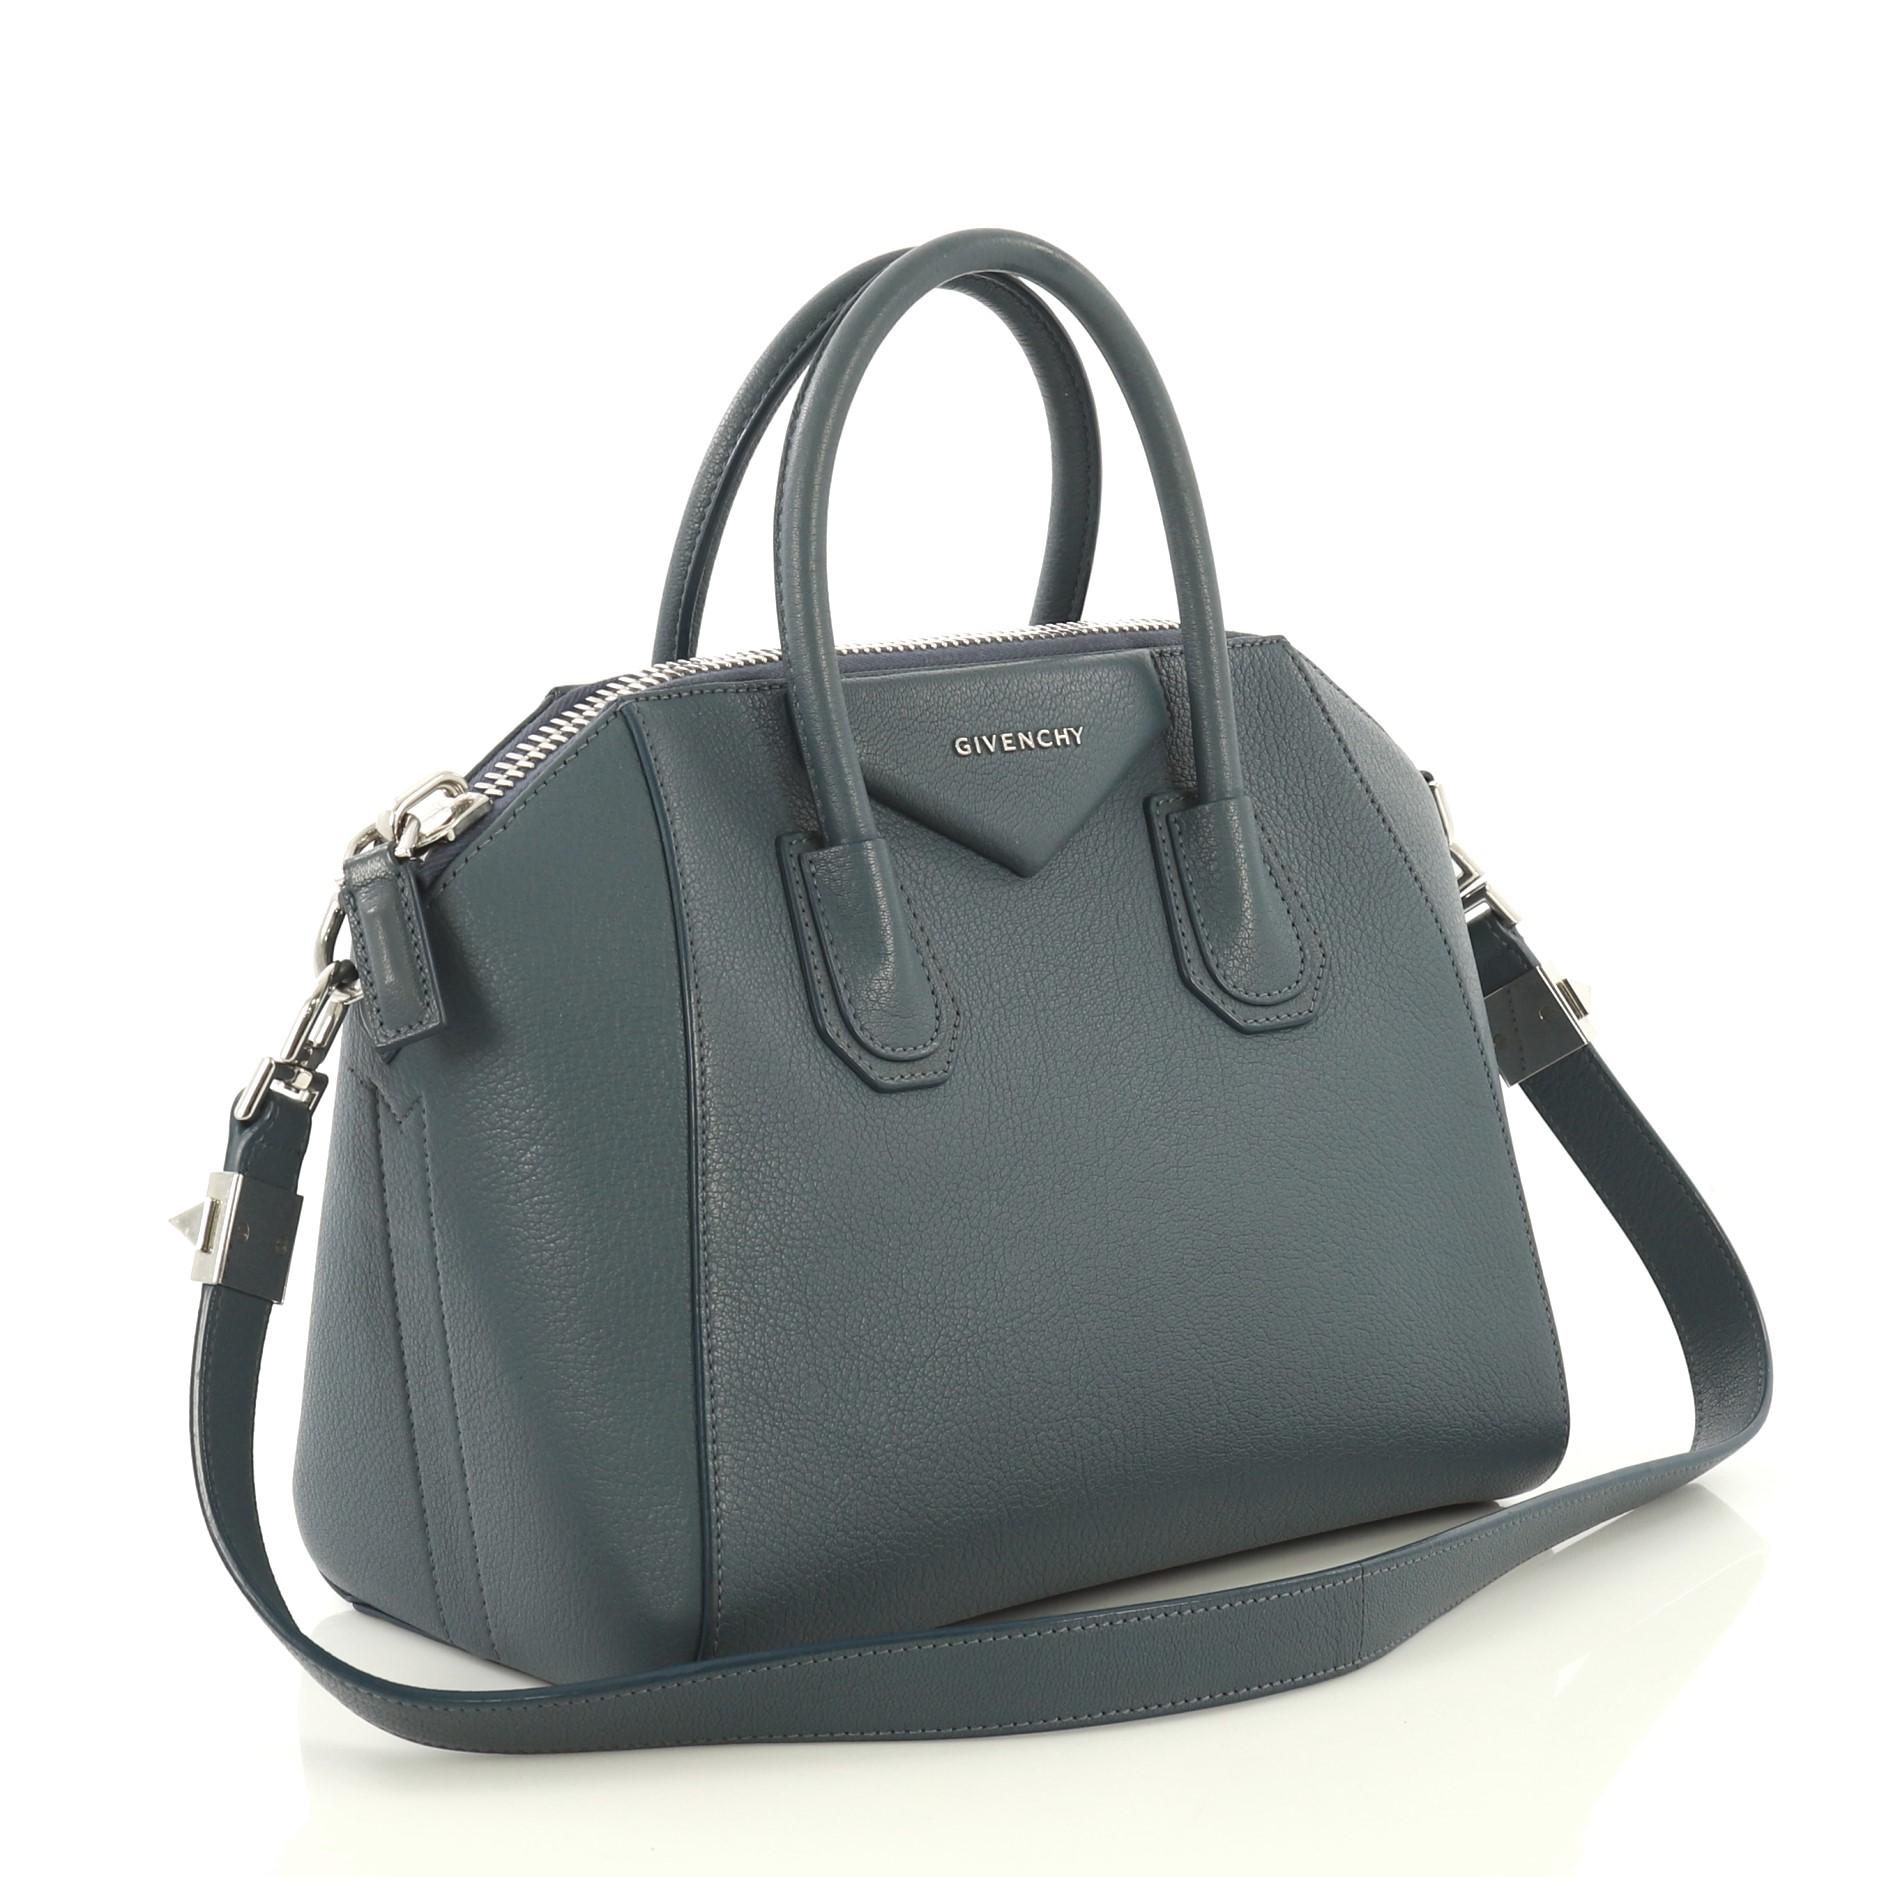 This Givenchy Antigona Bag Leather Small, crafted from blue leather, features dual rolled leather handles and silver-tone hardware. Its zip closure opens to a neutral fabric interior with zip and slip pockets. 

Estimated Retail Price: